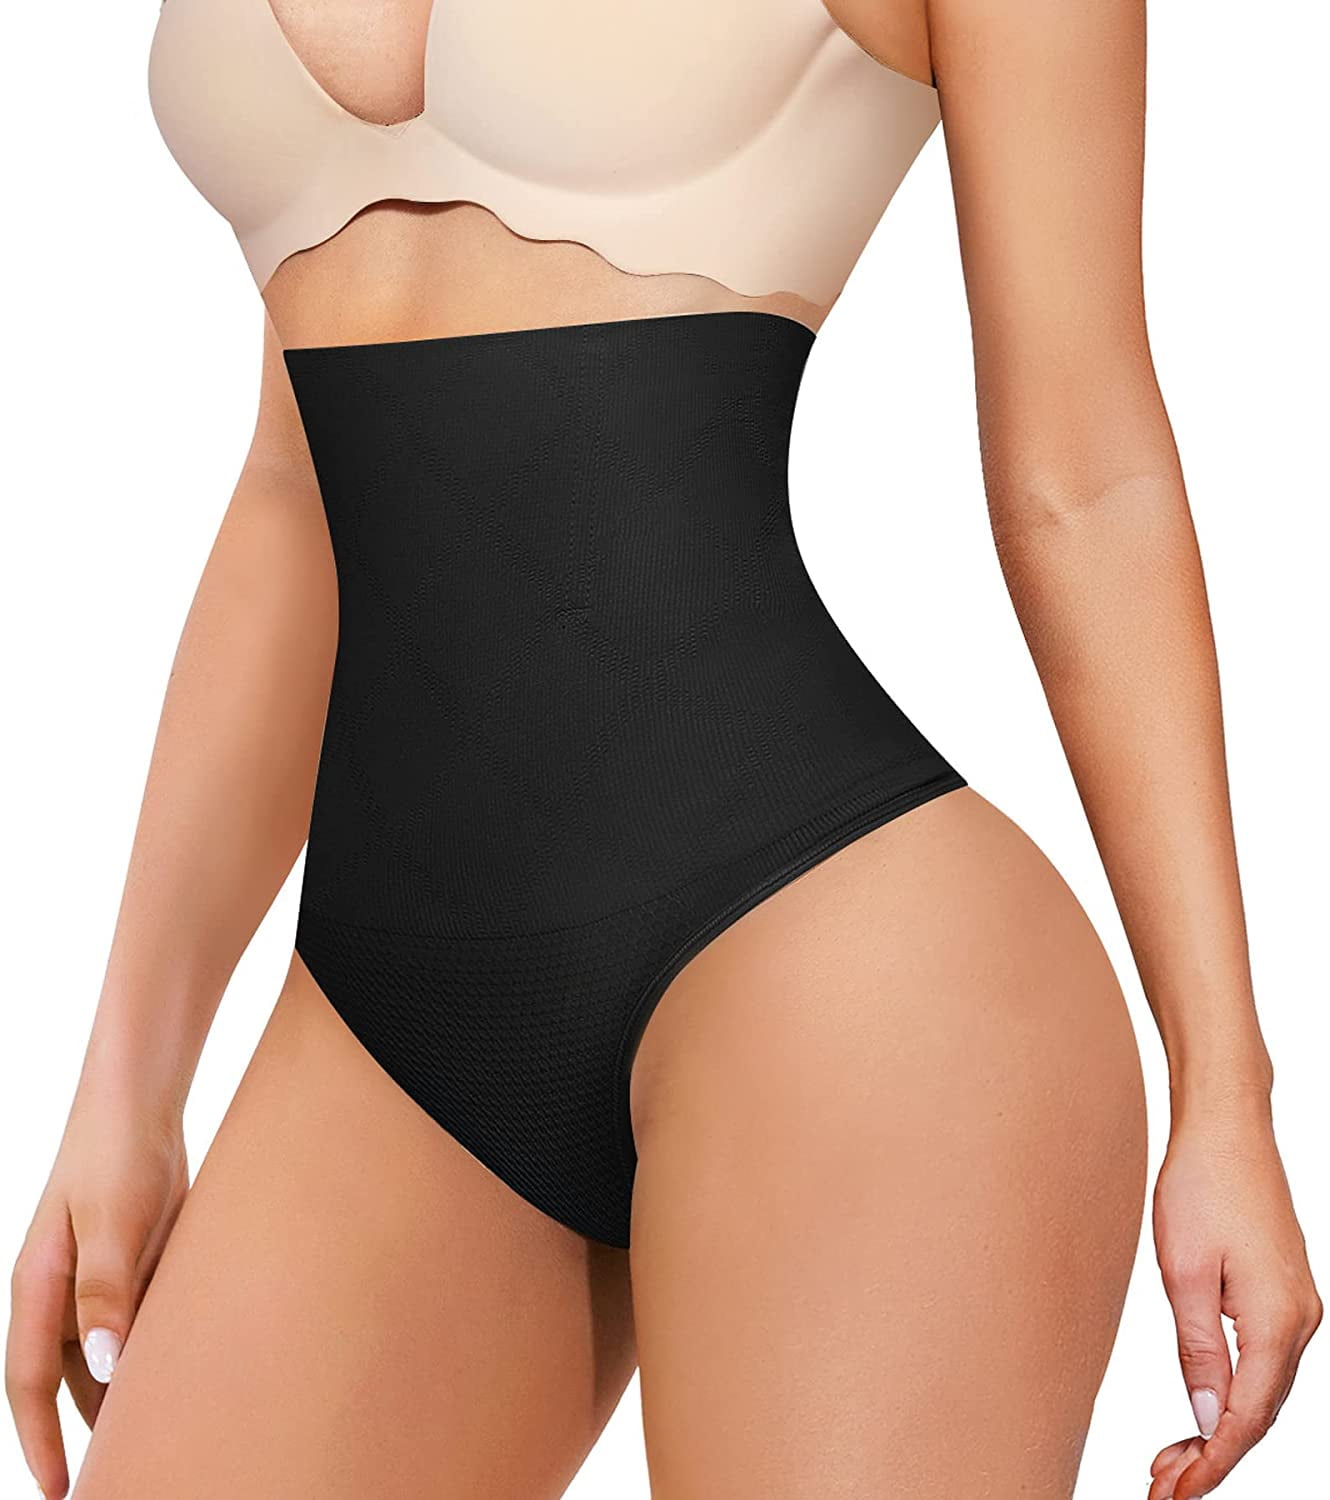 Gotoly Shapewear for Women Seamless Tummy Control Panties High